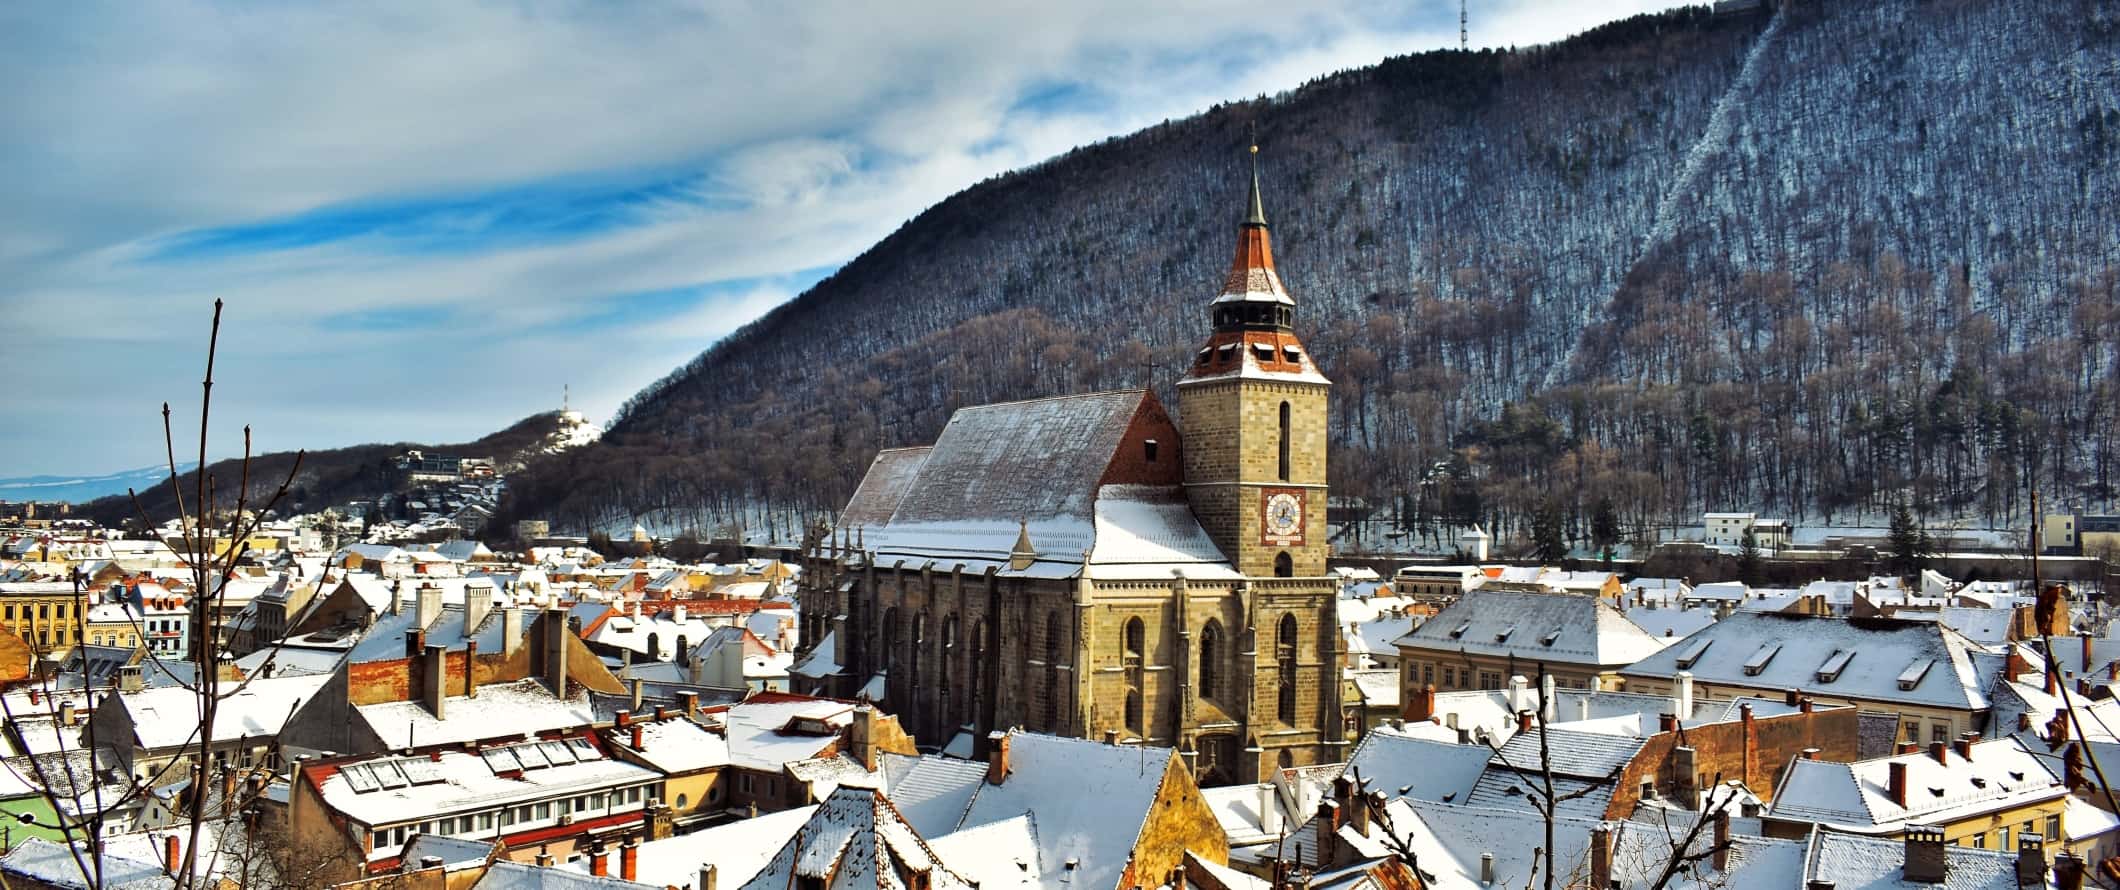 The 14th-century Black Church towering over snow-capped buildings in Brasov, Romania.